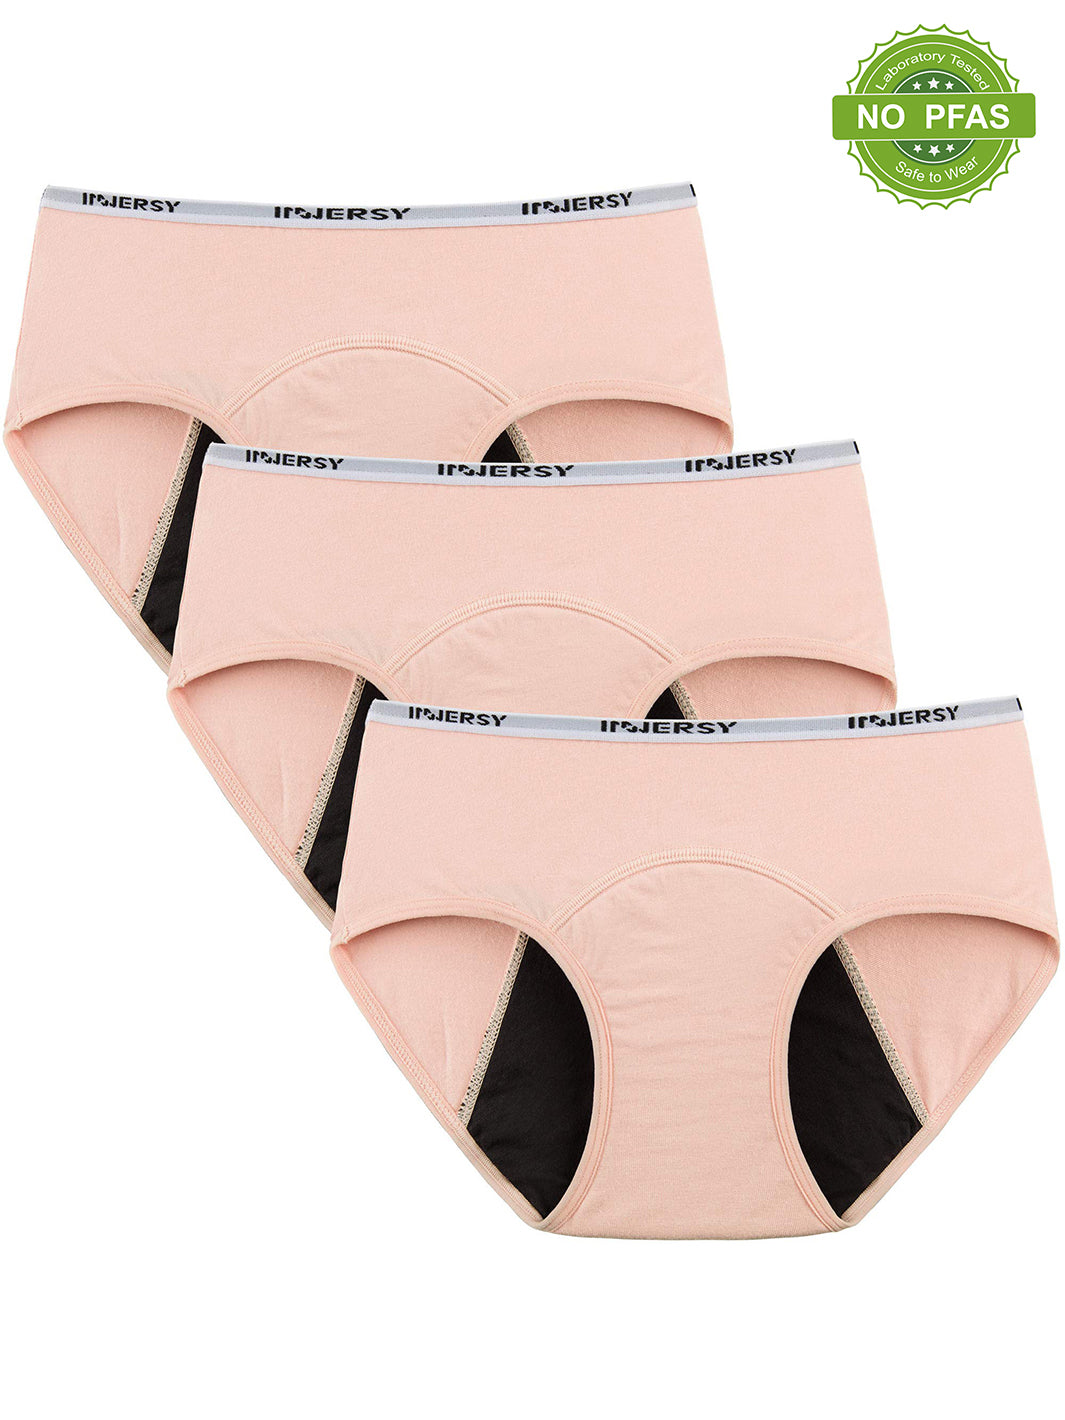  INNERSY Teen Girls Period Underwear Cotton First Starter Panties  Aged 10-16 Briefs 5 Pack(10-12 Years, 5 Black): Clothing, Shoes & Jewelry